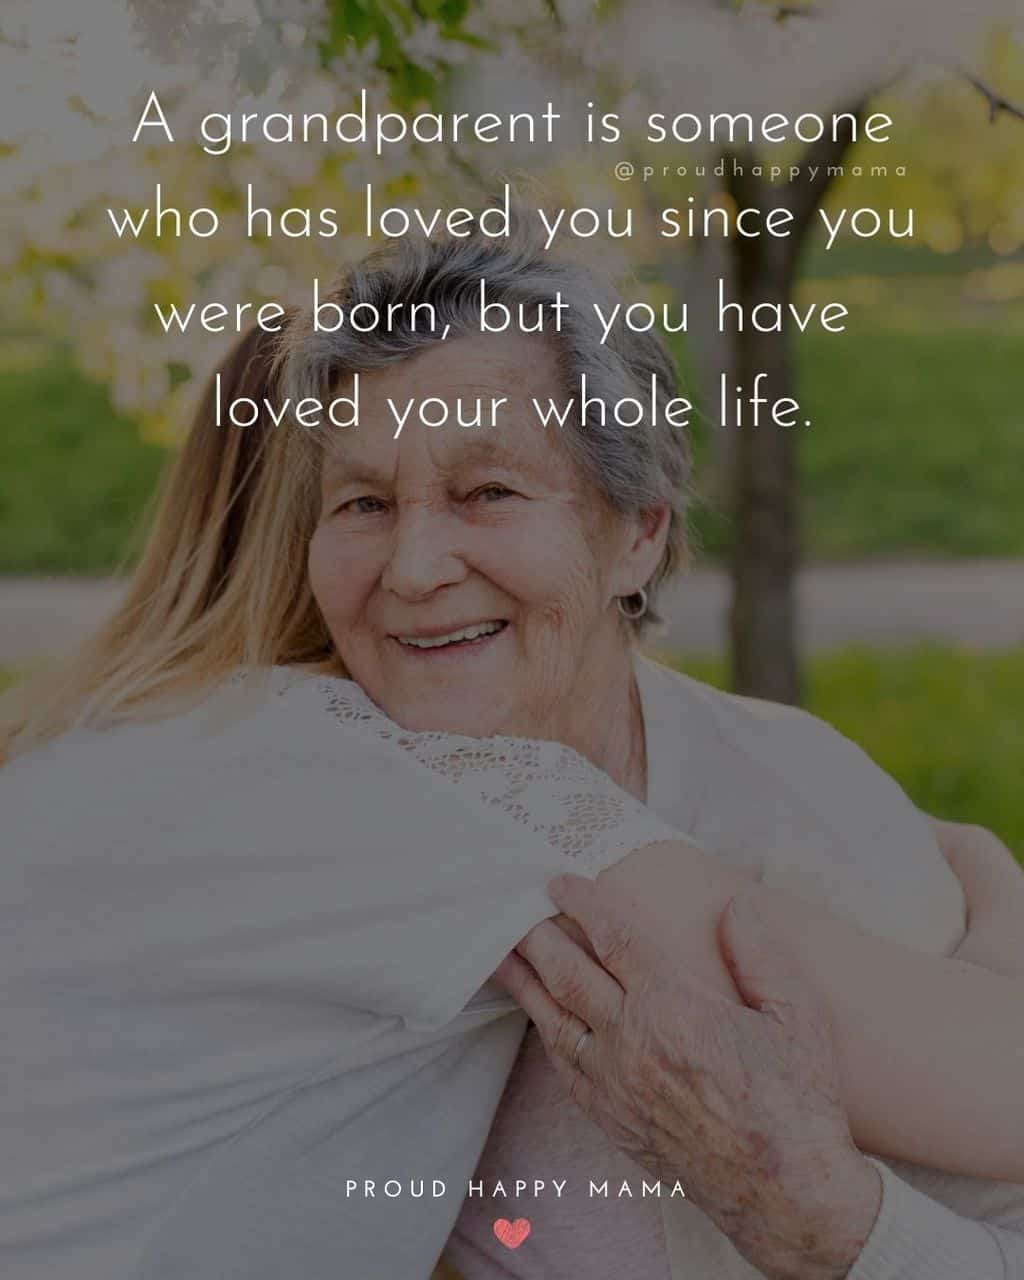 Grandparent Quotes – A grandparent is someone who has loved you since you were born, but you have loved your whole life.’